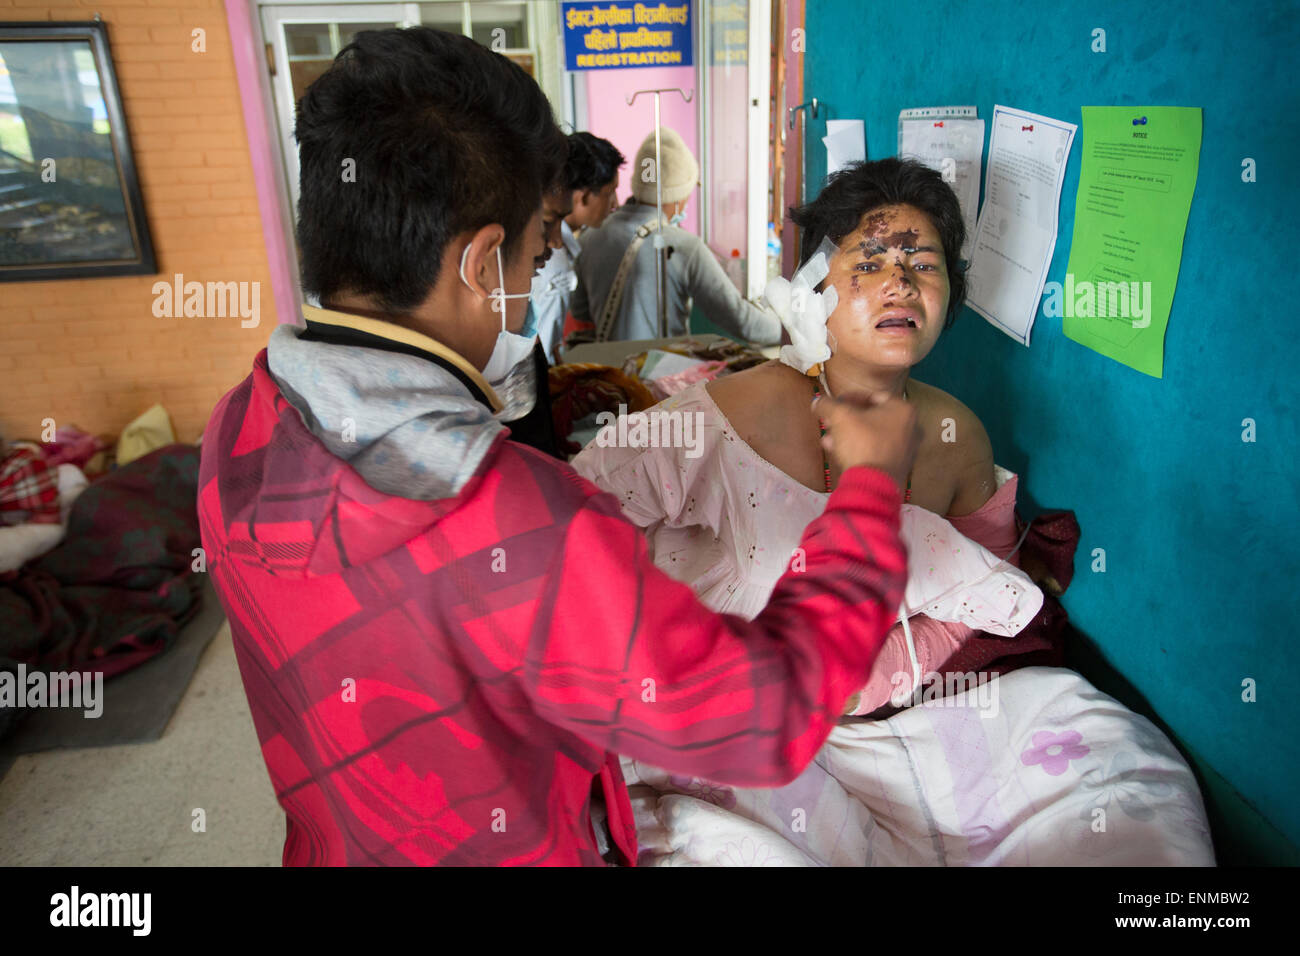 Victims of the 2015 earthquake are treated at Kathmandu University Hospital in Kavre District, Nepal. Stock Photo